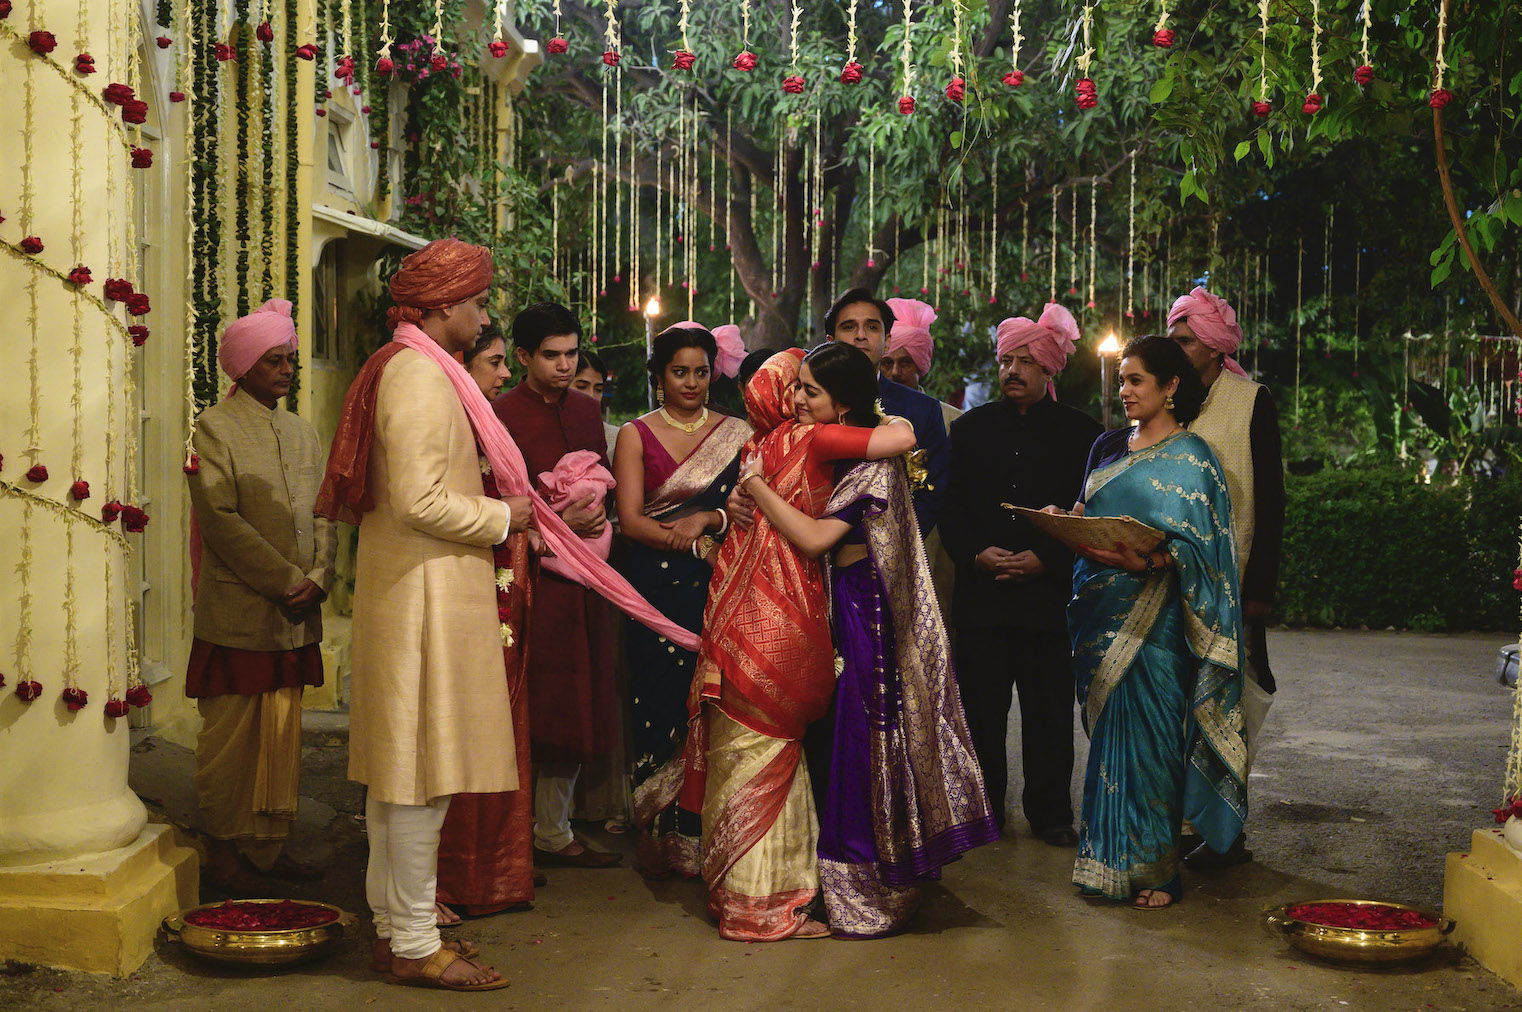 One daughter married off, one to go. The opulent wedding scene that opens A Suitable Boy. Credit: BBC/Lookout Point